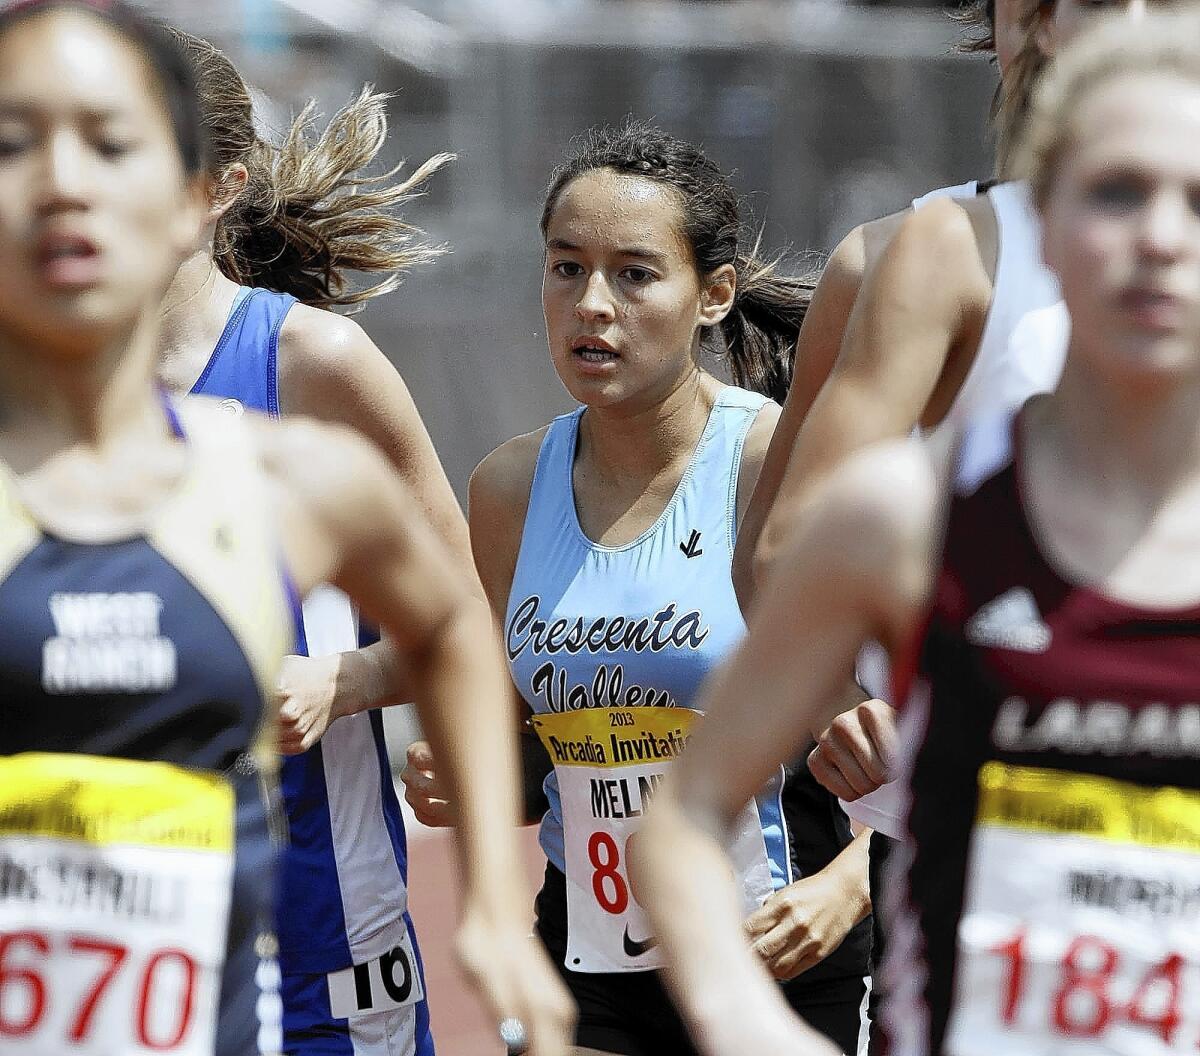 Crescenta Valley High's Megan Melnyk, center, competed in the Women's 800 meters race #2 at the Arcadia Invitational in Arcadia on Saturday, April 6, 2013.